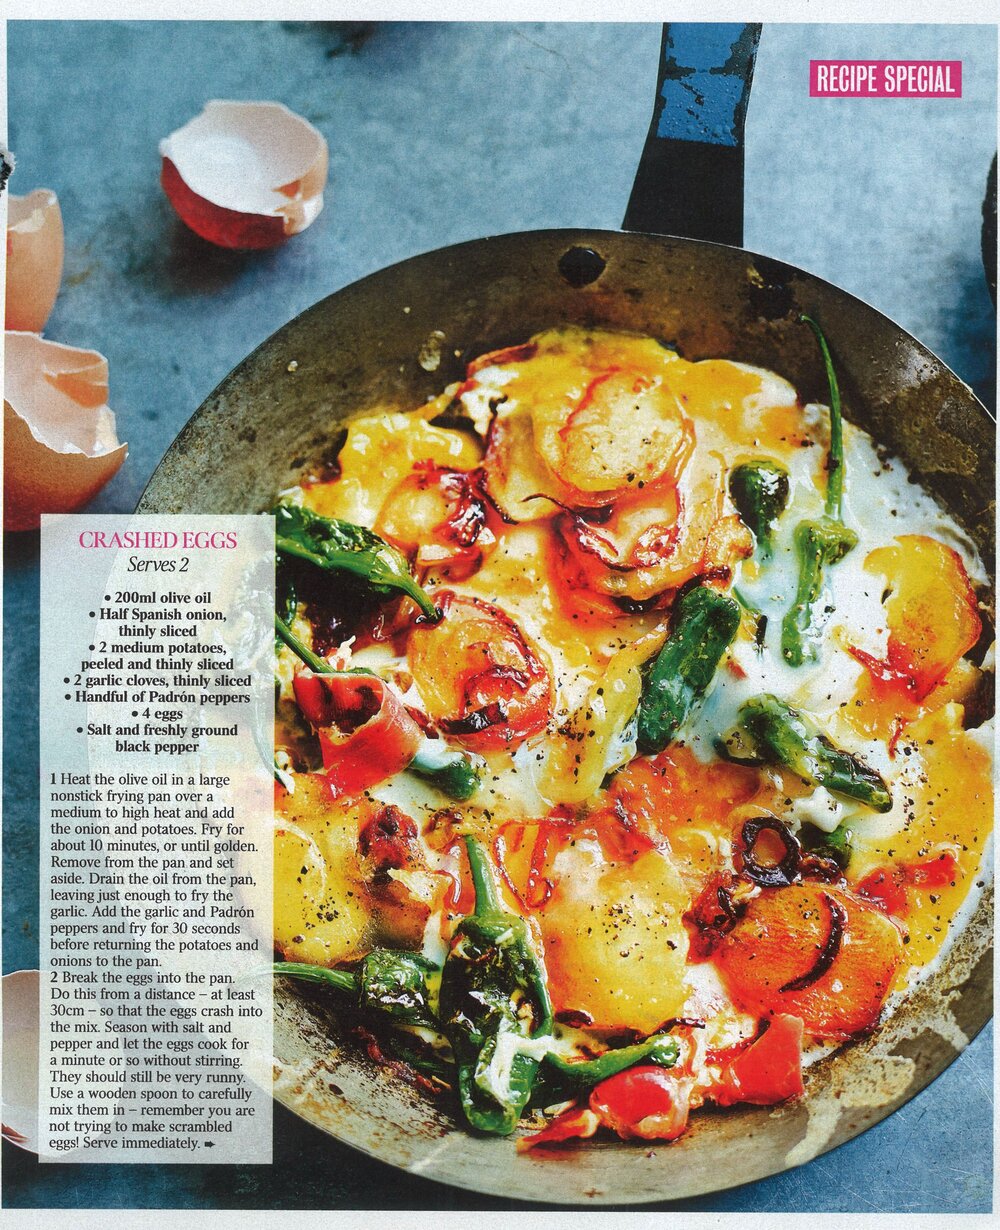 The Times Magazine - 27th July 2013 (Page 6 of 7).jpg